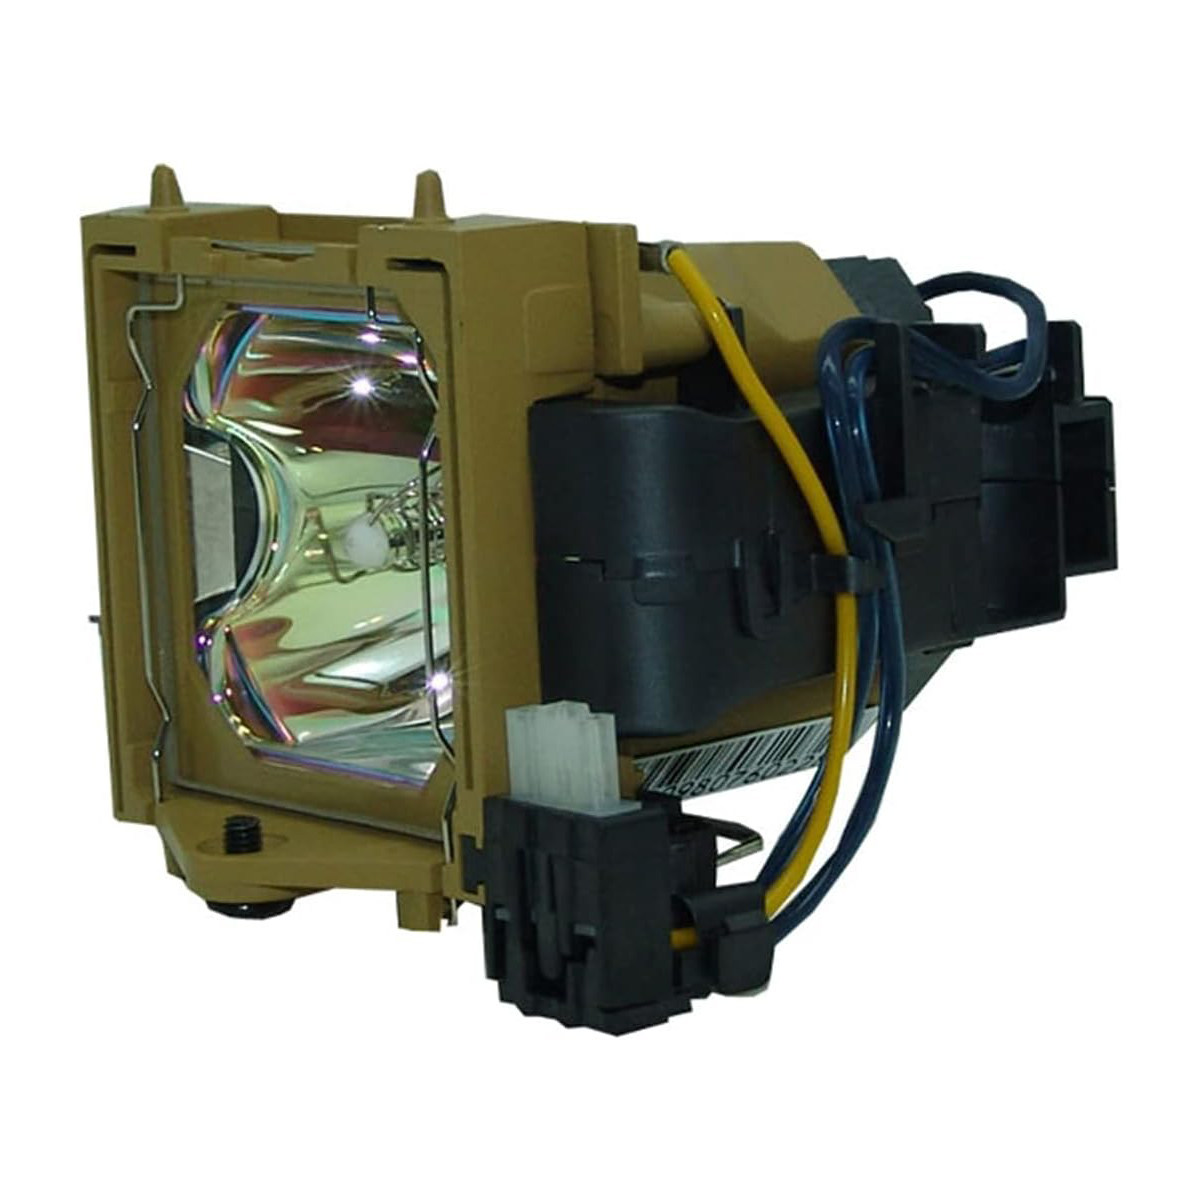 Replacement Projector lamp 456-8758 For Dukane Projector